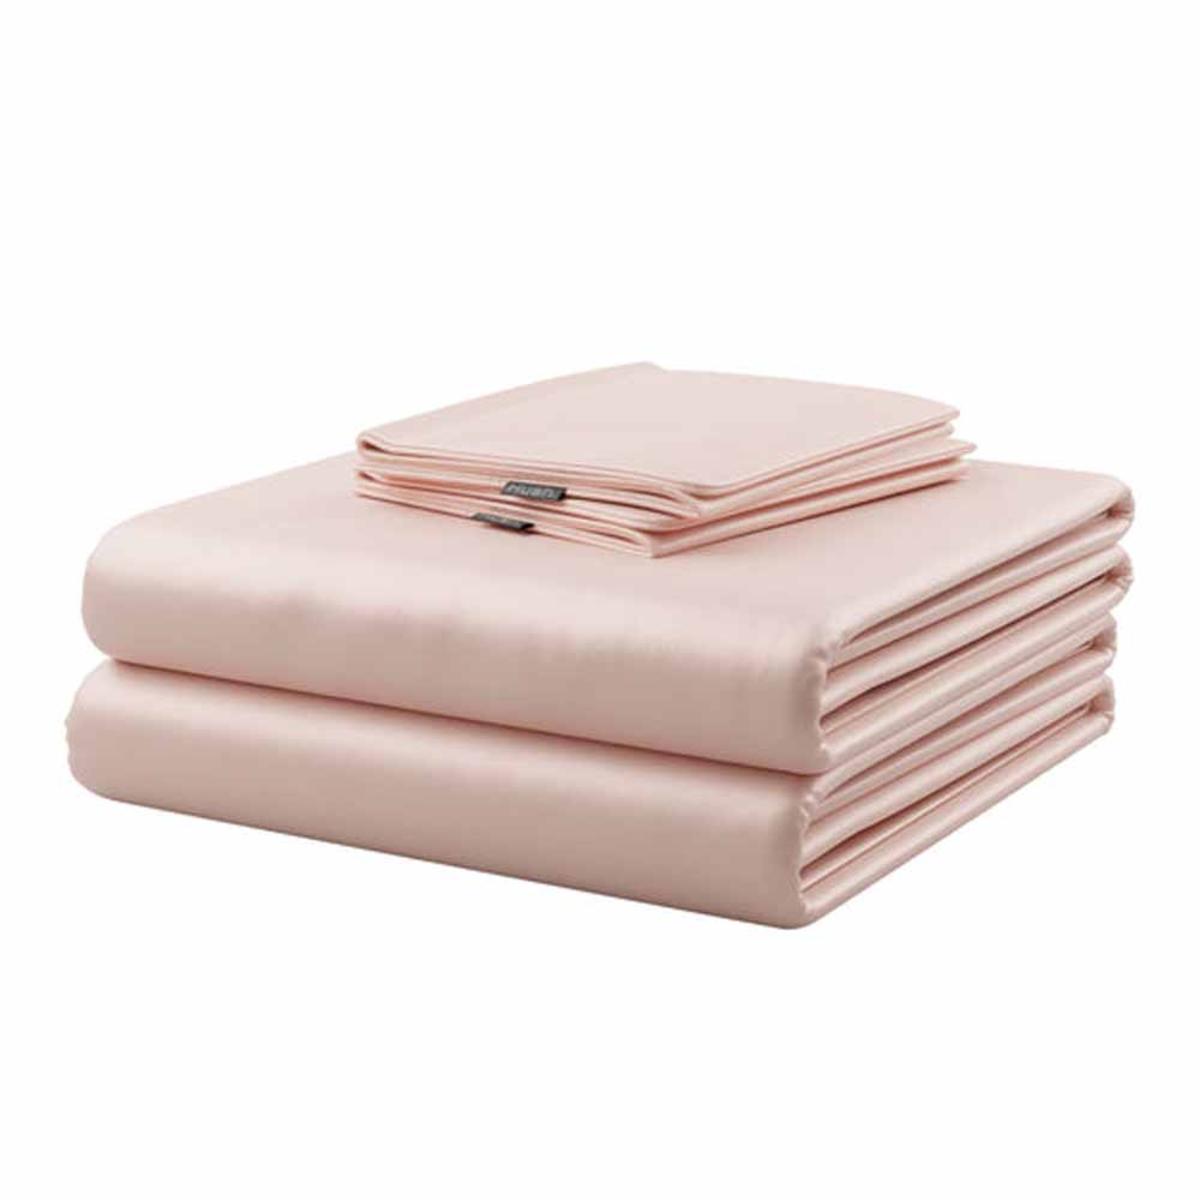 Hush Iced Cooling Sheet and Pillowcase Set - Full